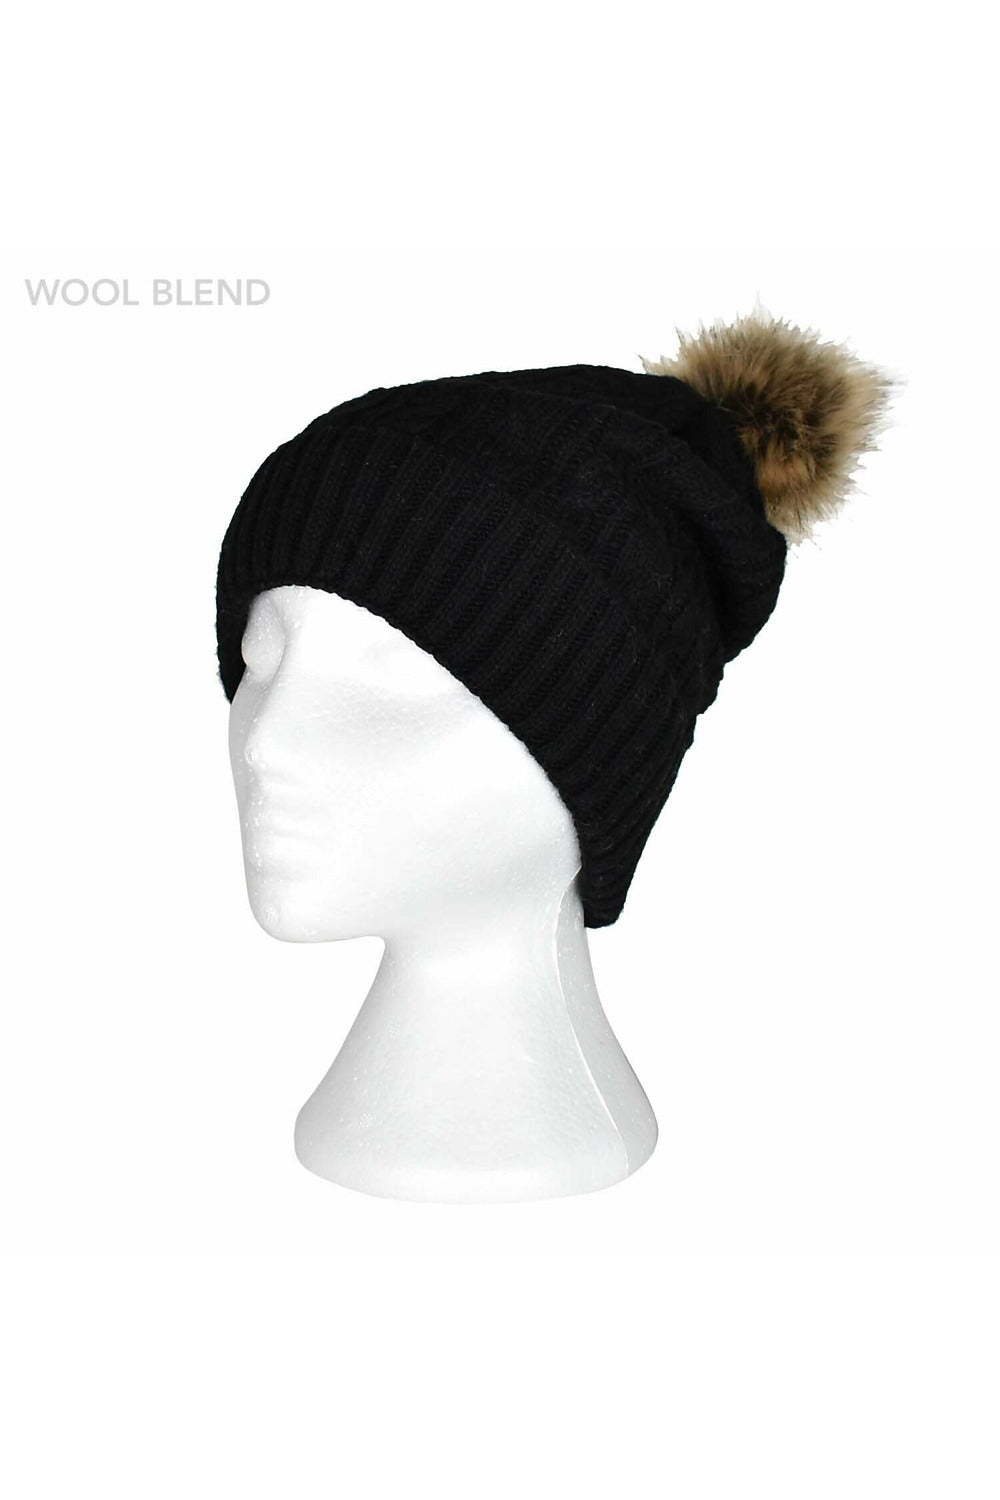 Taylor Hill Braid Knitted Beanie in Black